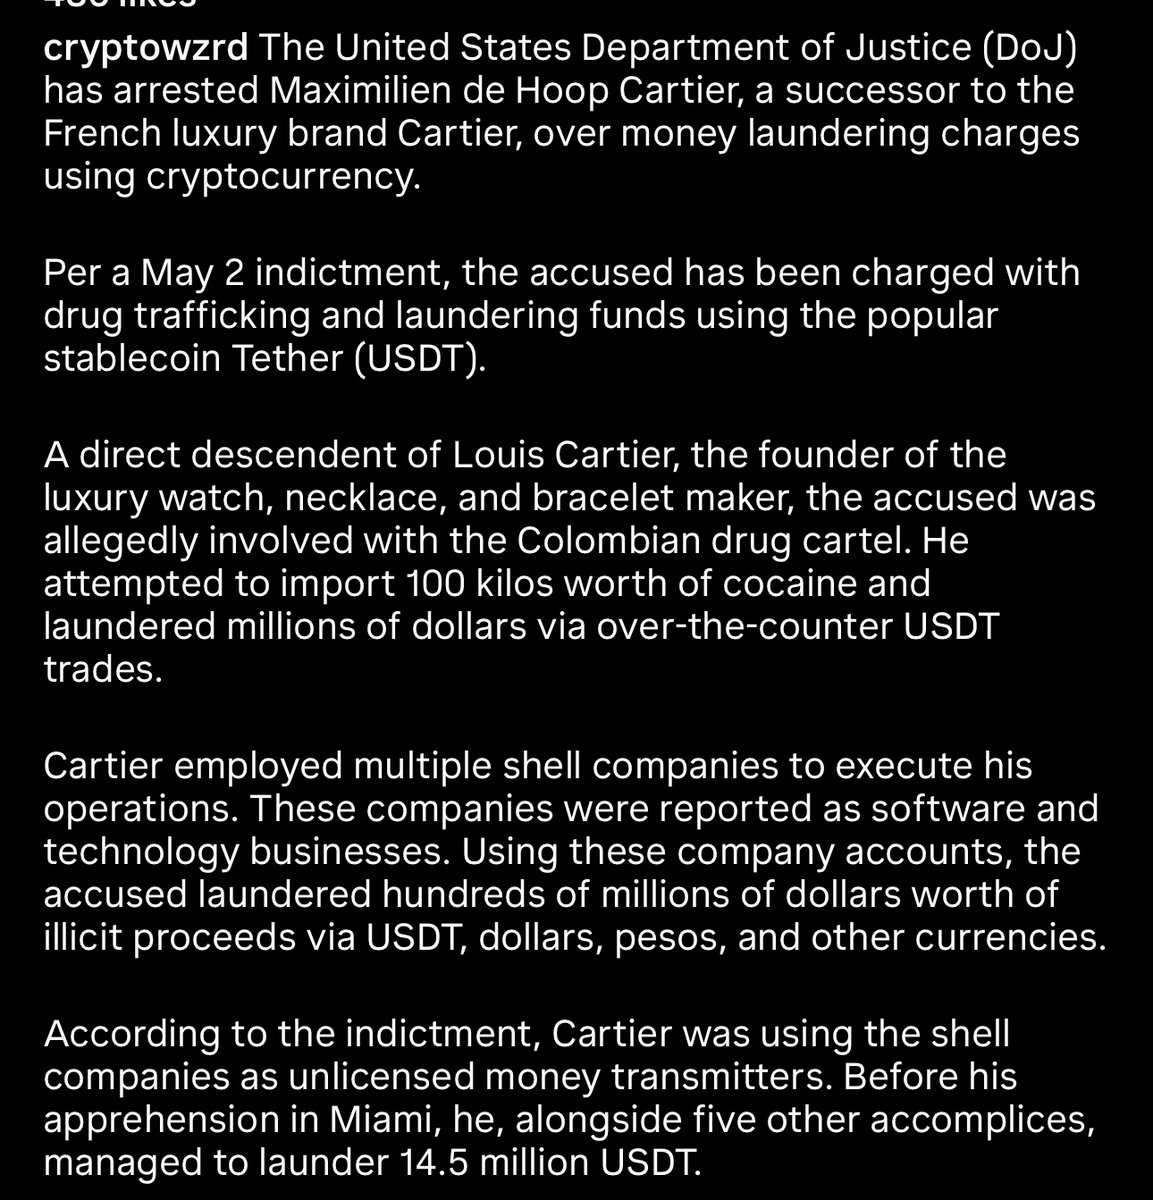 So the heir to Cartier got caught importing 100 kilos for Colombian cartel and laundering money with OTC USDT trades. Sounds like a smart guy.